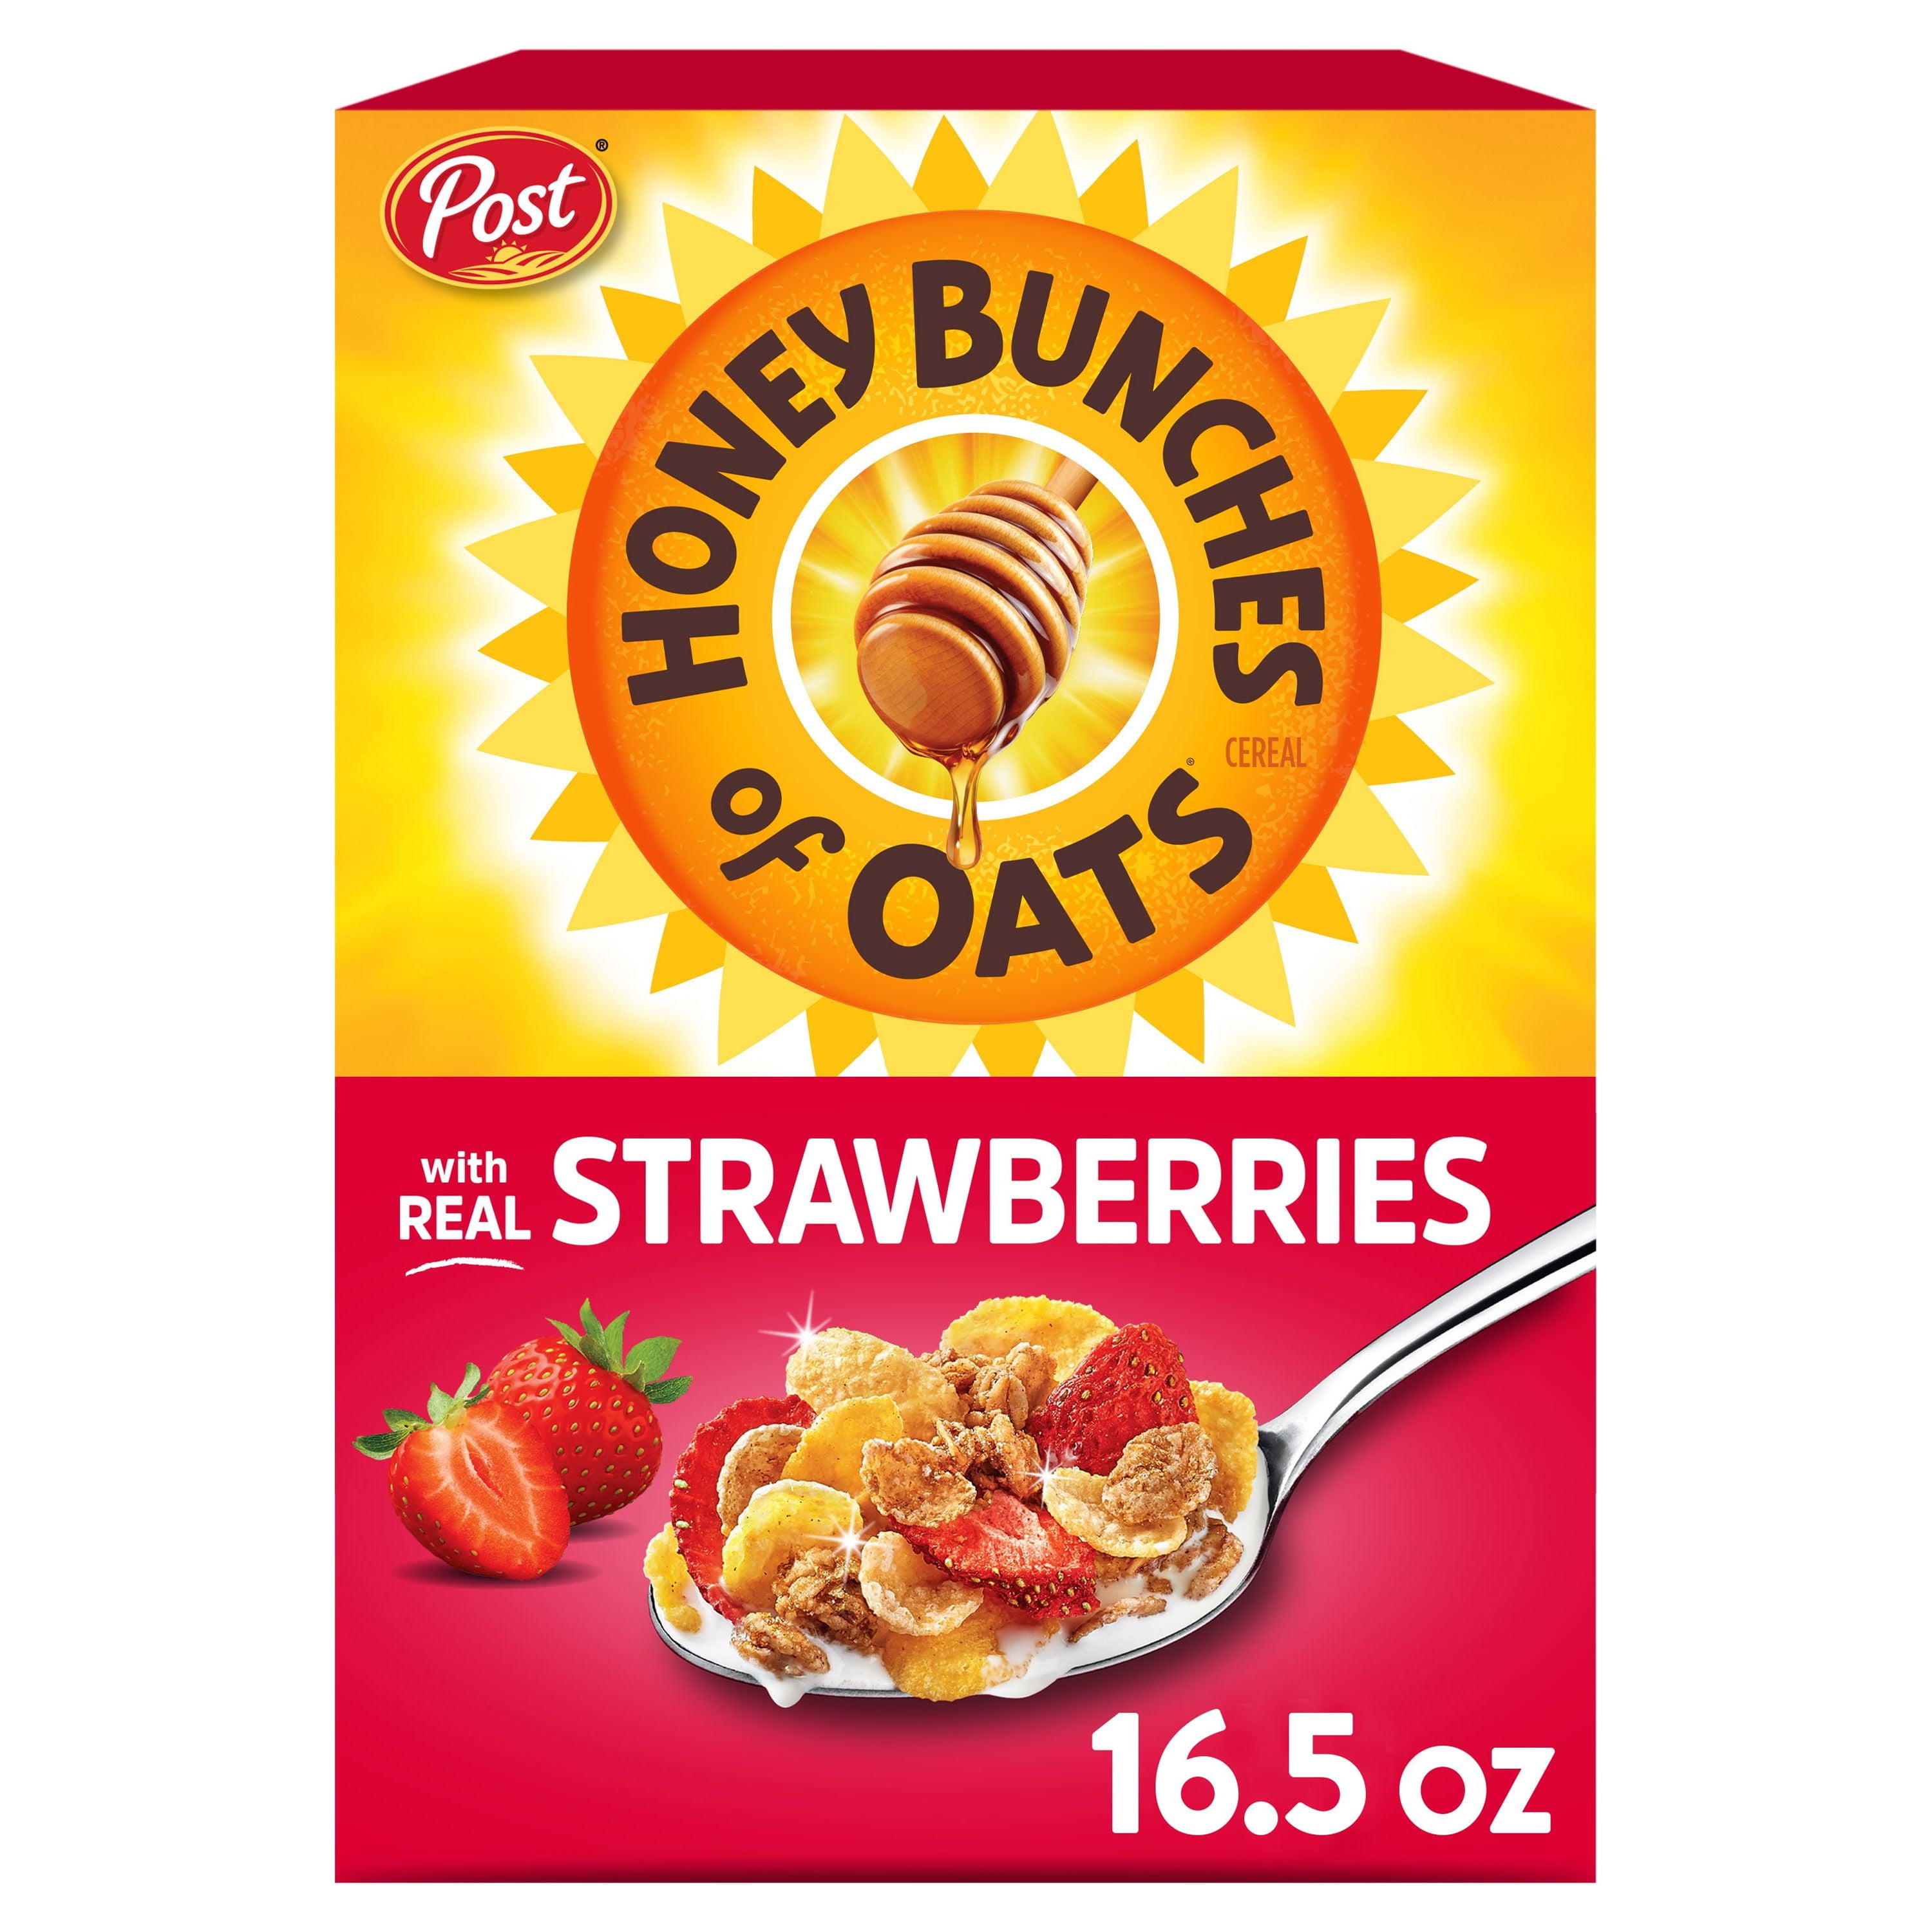 Post Honey Bunches of Oats with Strawberries Breakfast Cereal